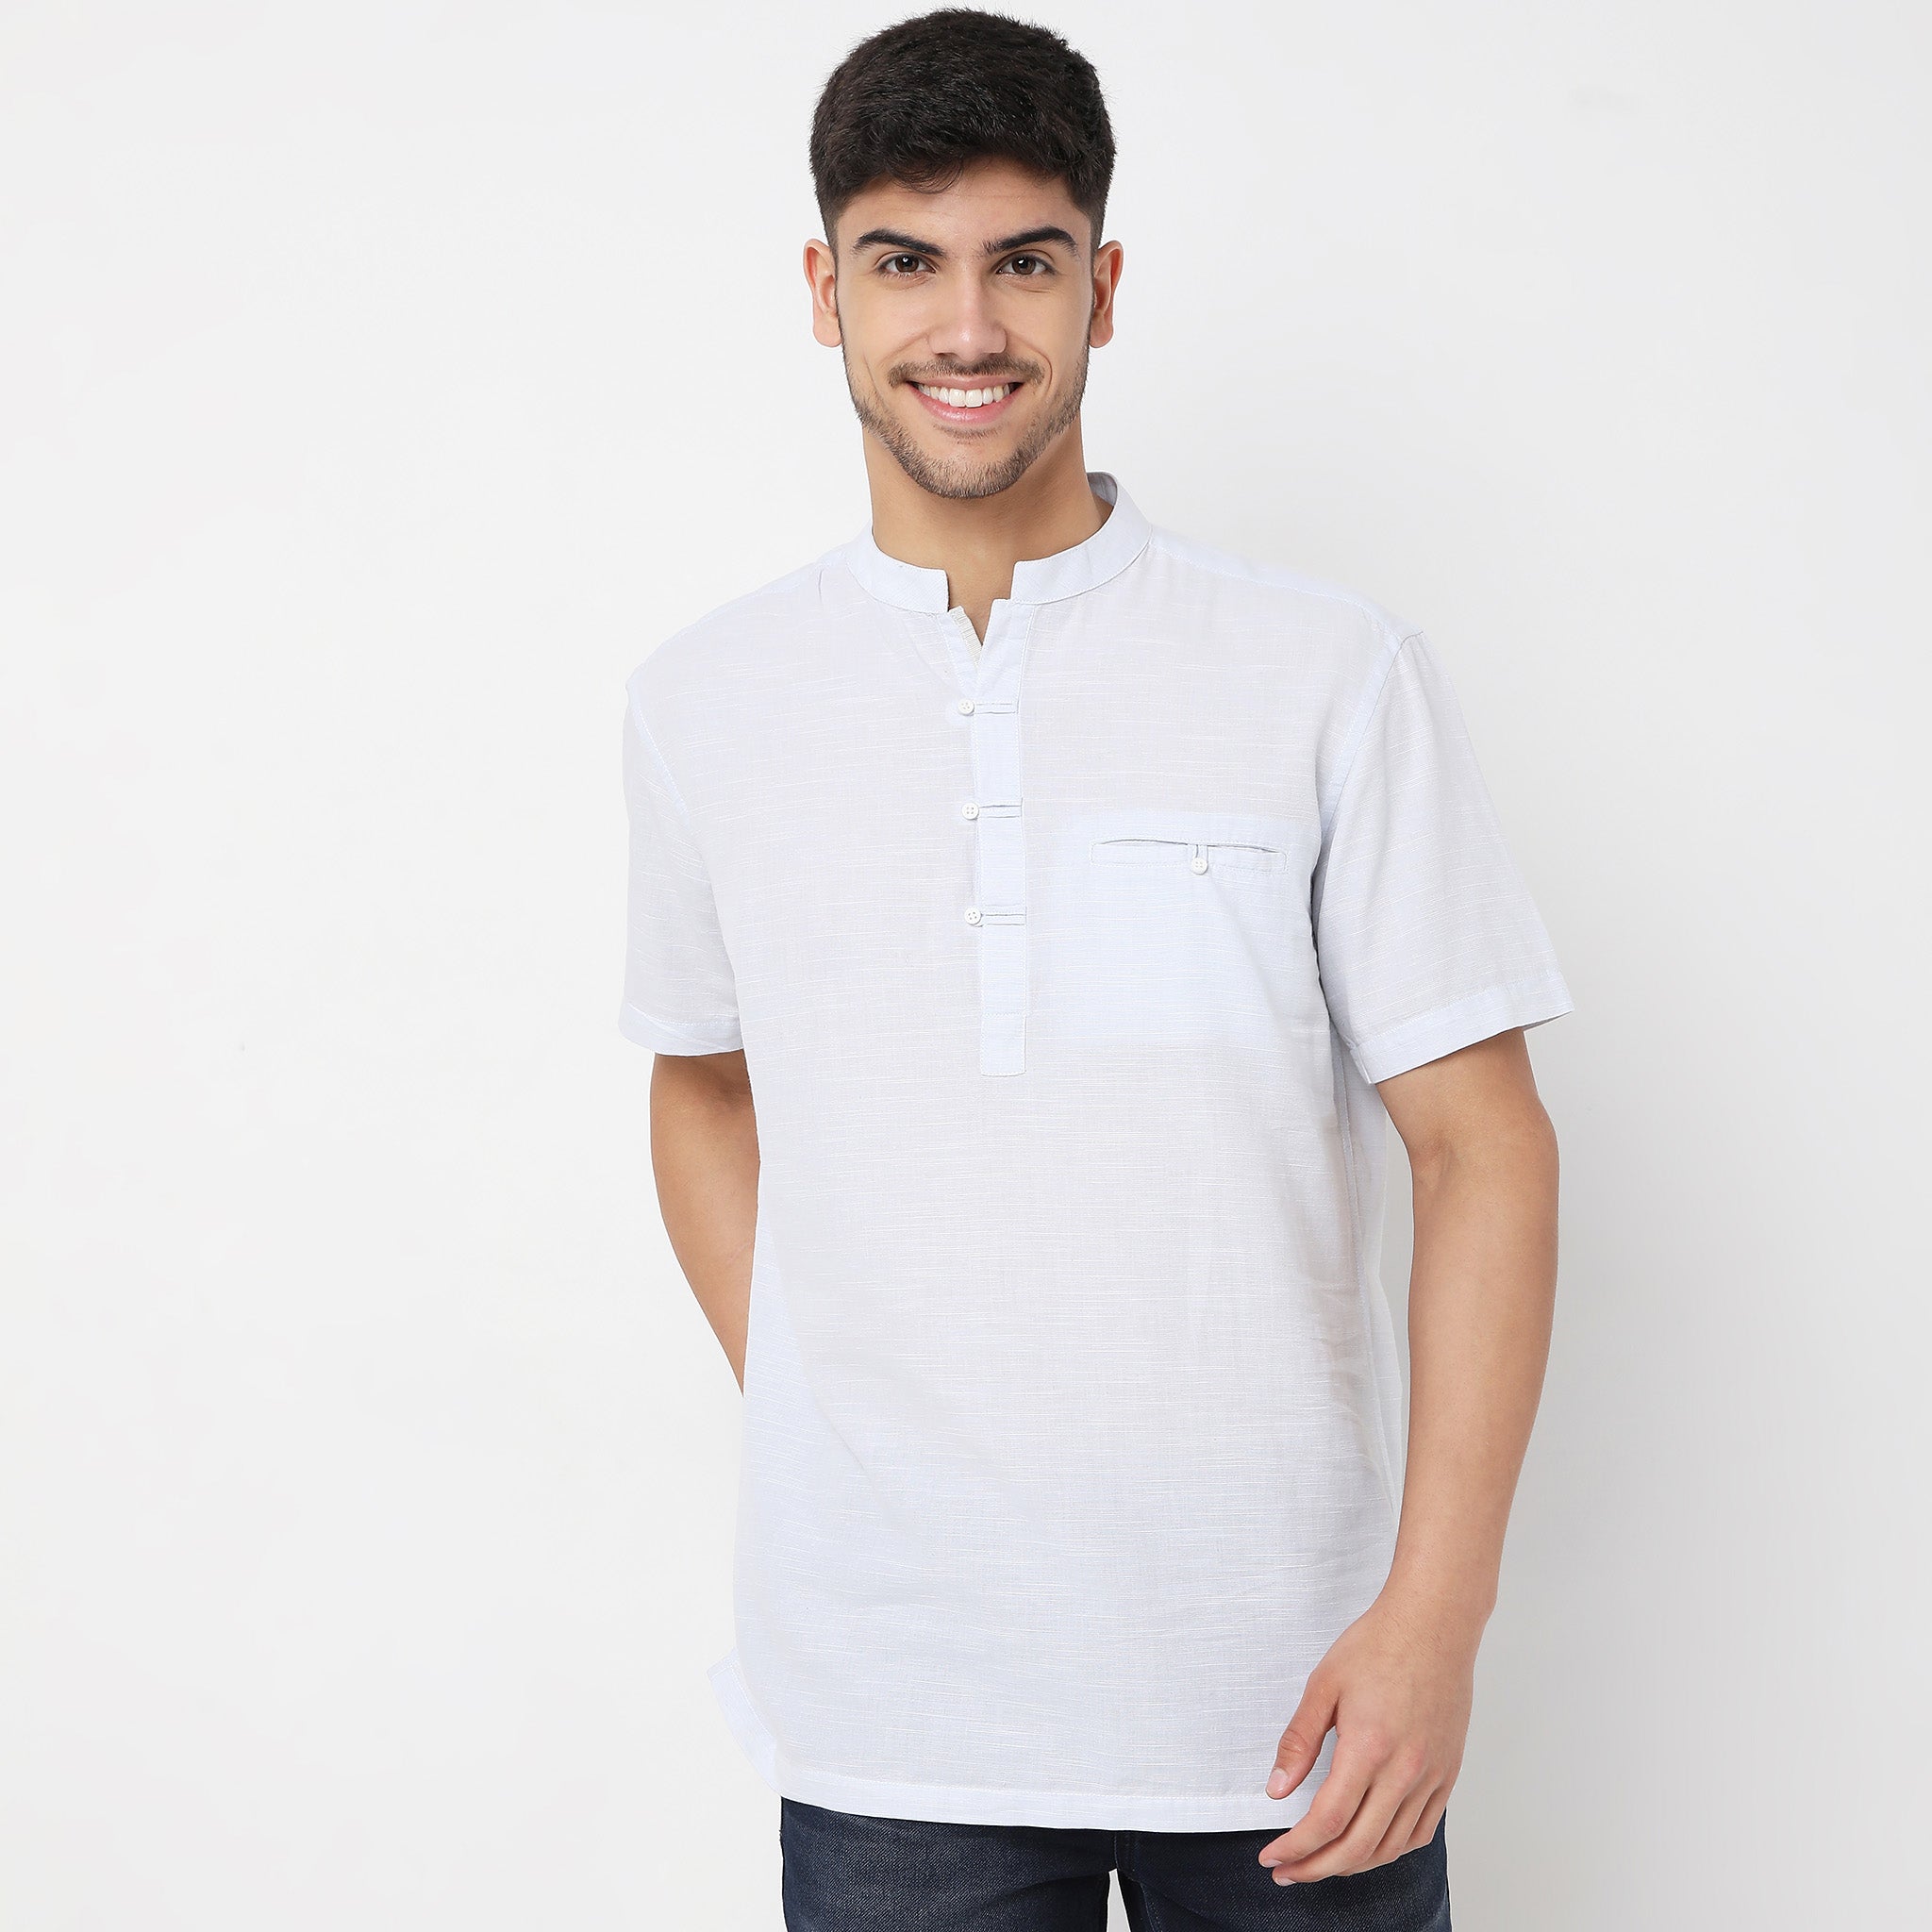 Men Wearing Relaxed Fit Solid Shirt